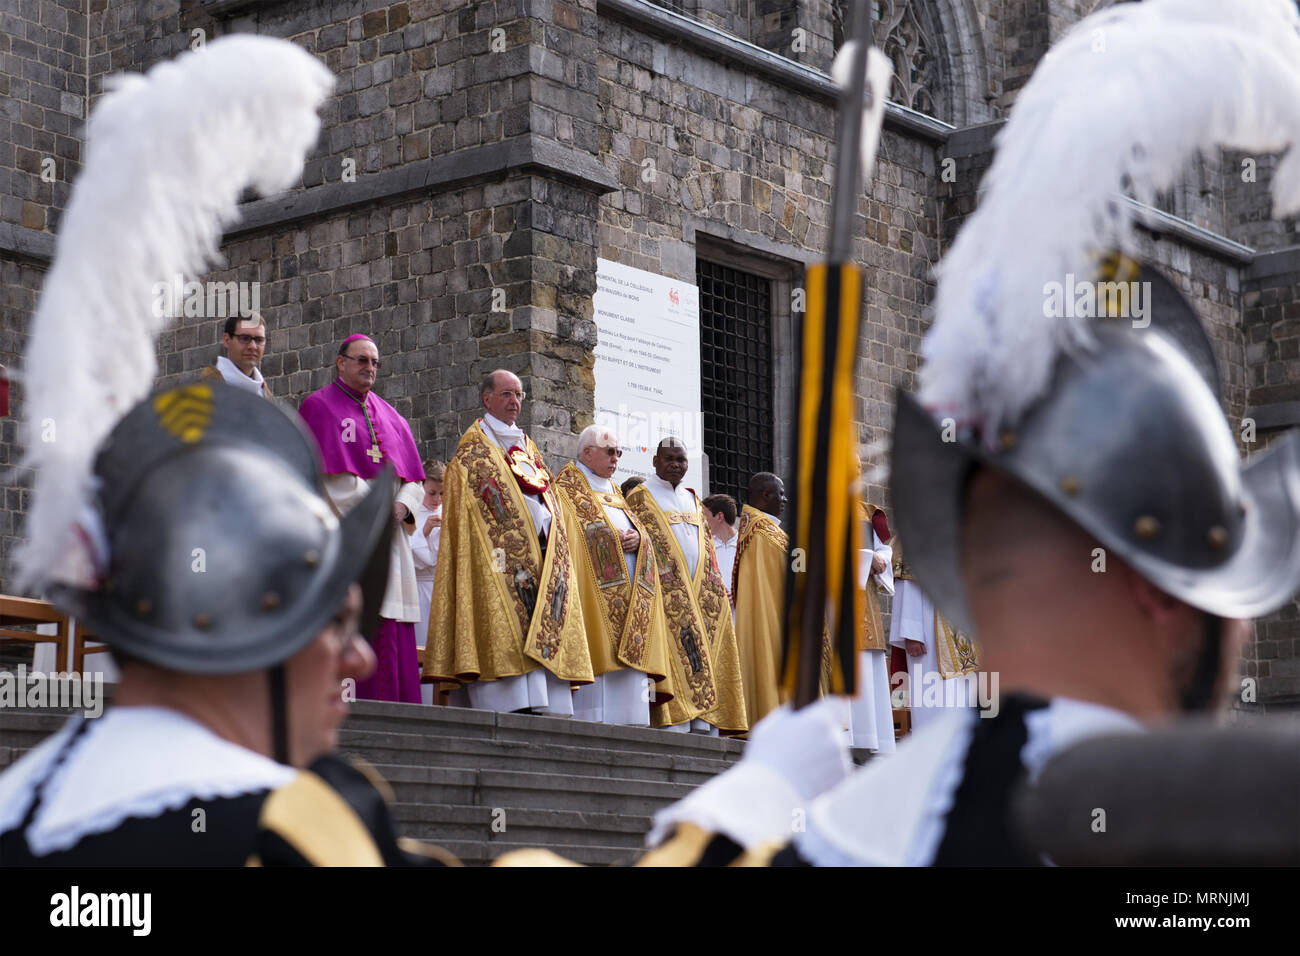 Mons, Belgium. 27th May, 2018. Clergy of Catholic Church greets participants of Procession of Car D’Or during Ducasse celebrations on May 27, 2018 in Mons, Belgium Credit: Skyfish/Alamy Live News Credit: Skyfish/Alamy Live News Stock Photo